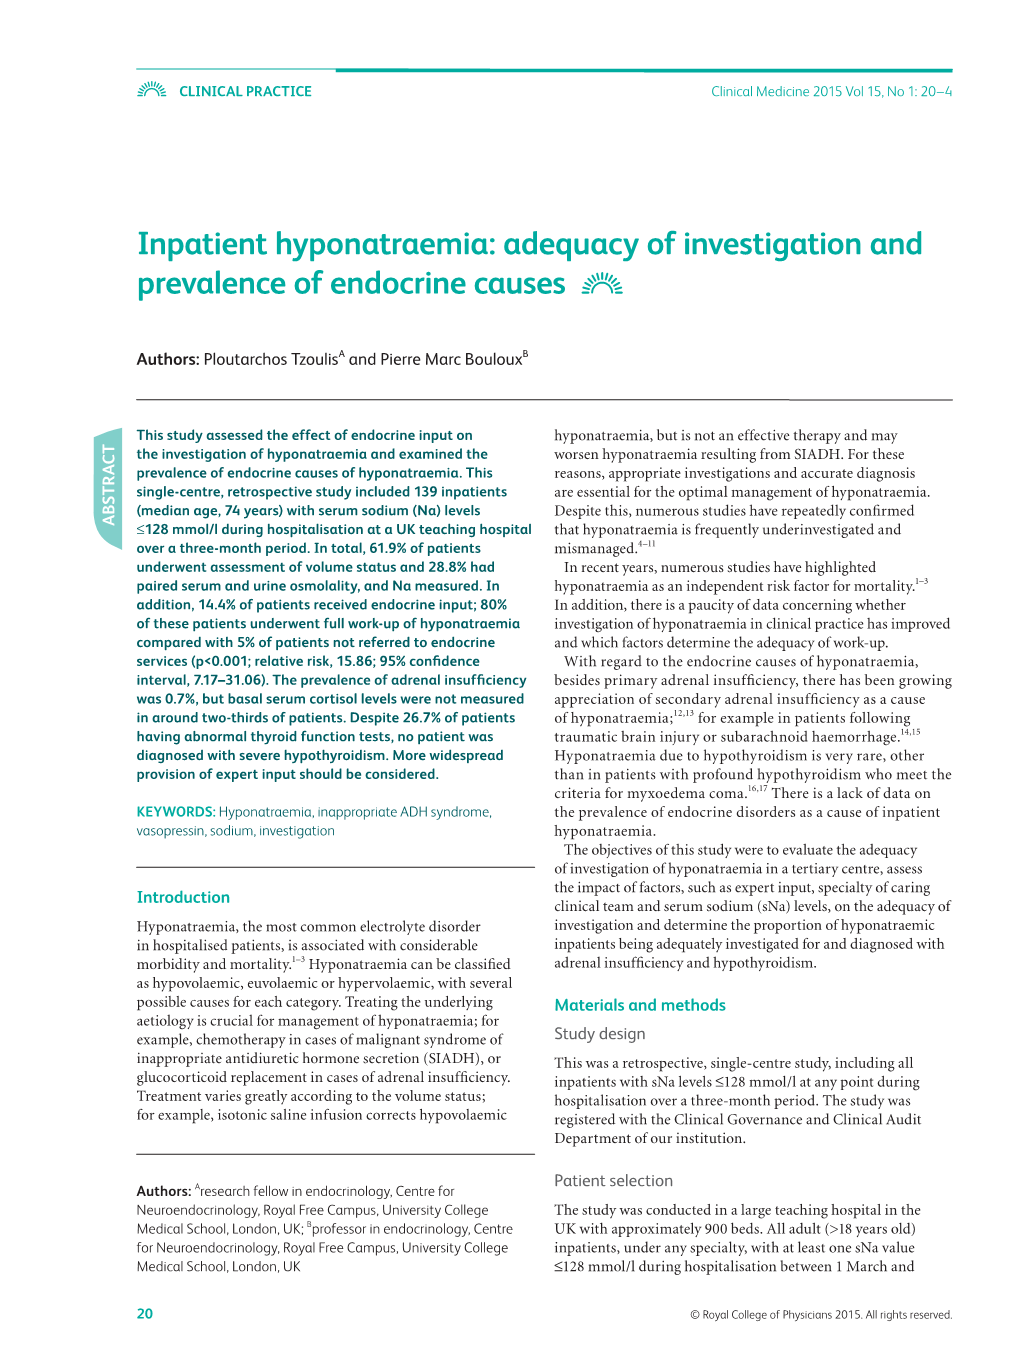 Inpatient Hyponatraemia: Adequacy of Investigation and Prevalence of Endocrine Causes